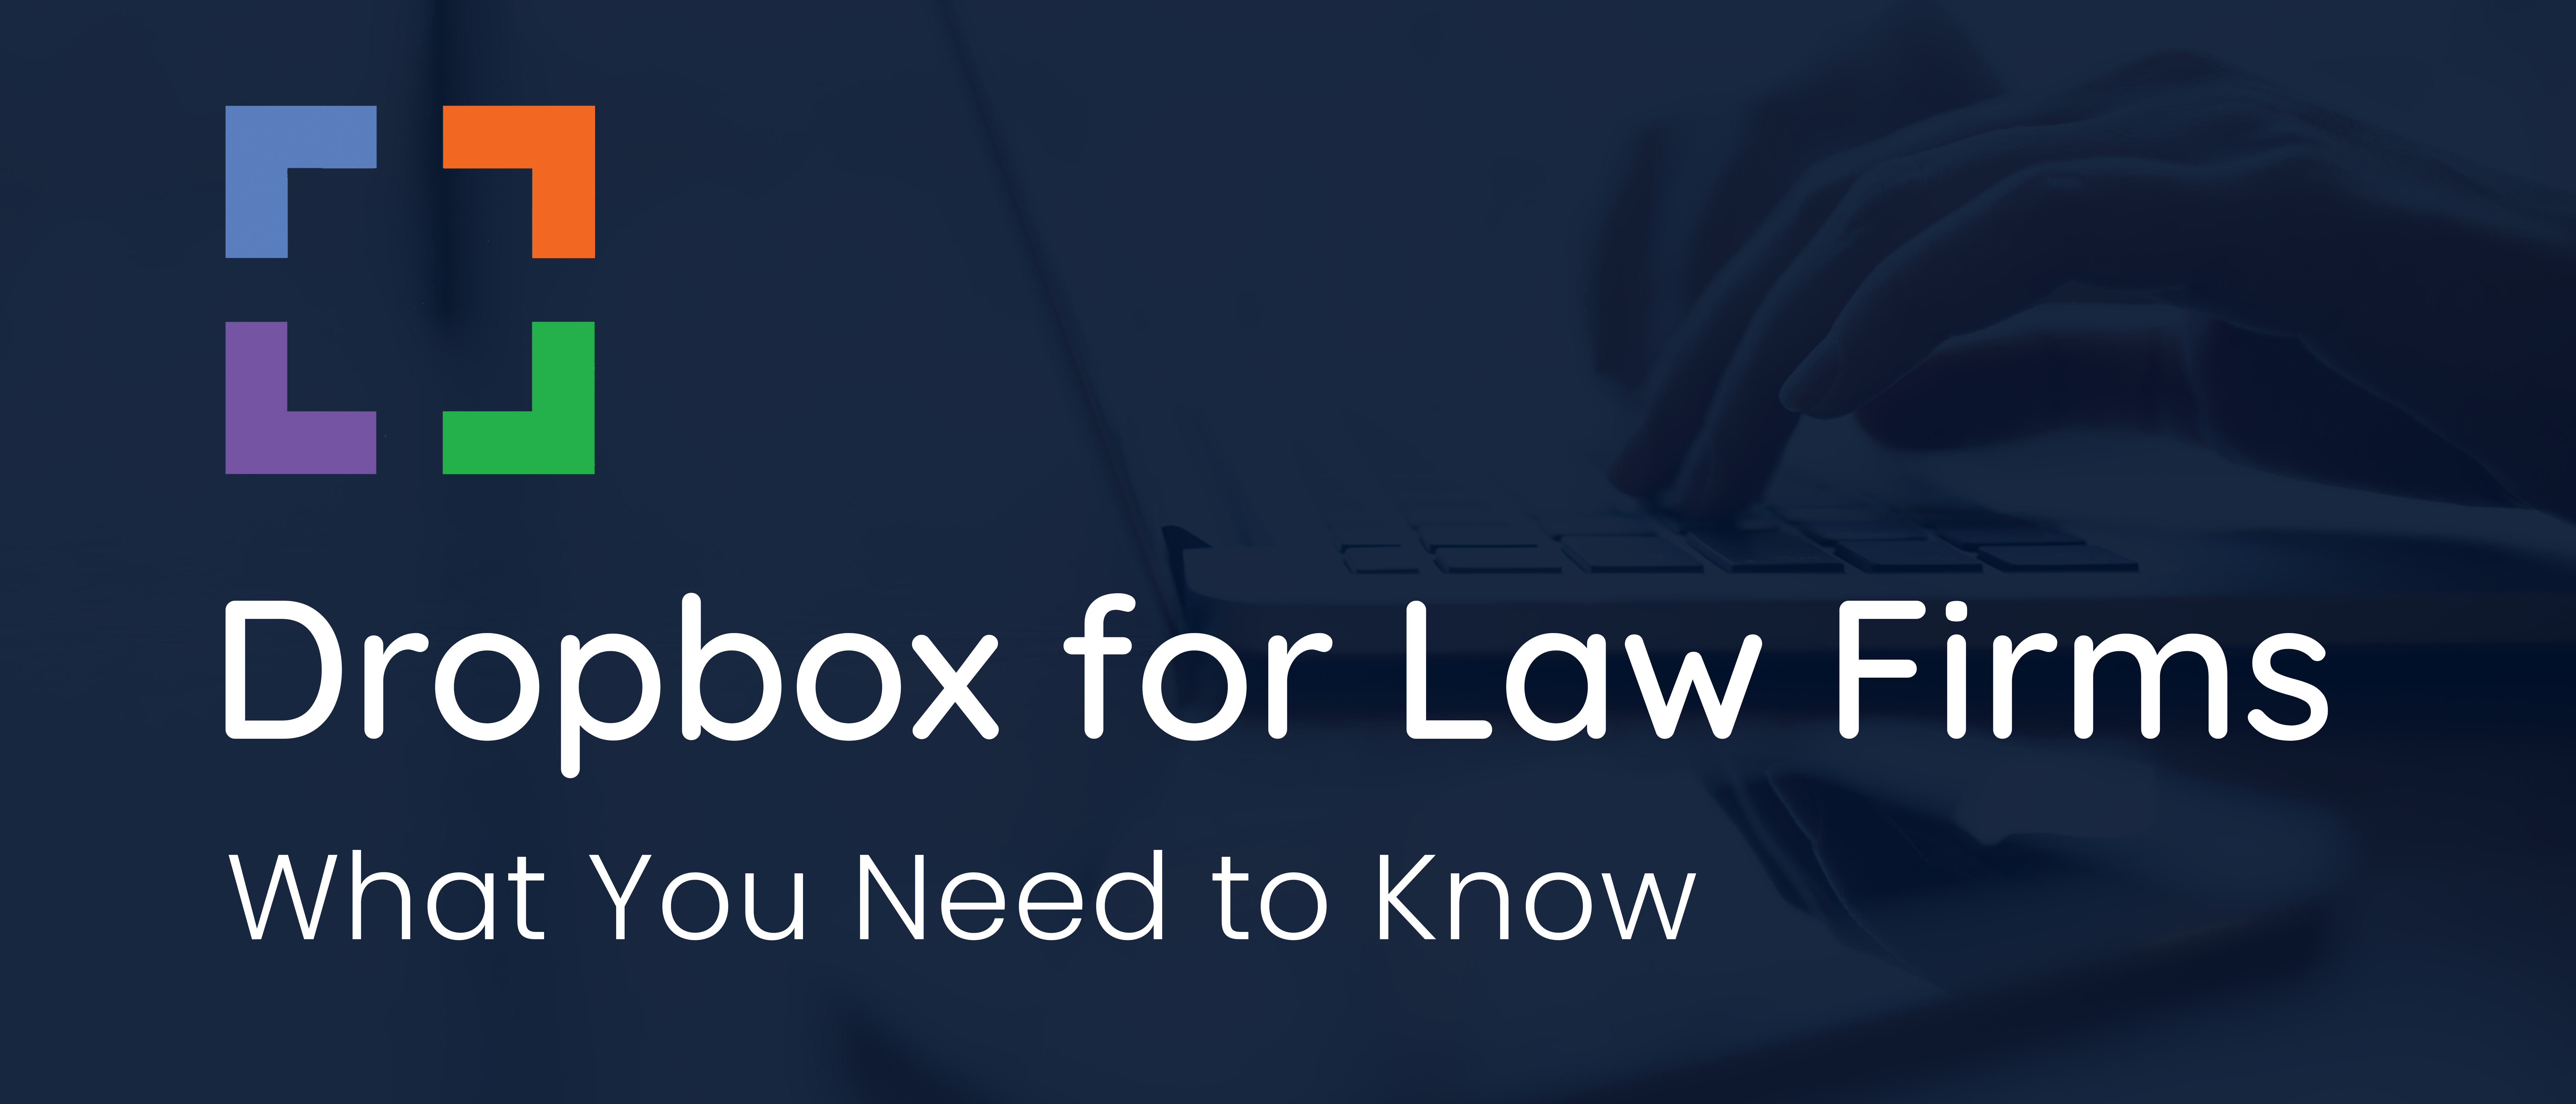 Dropbox for Law Firms